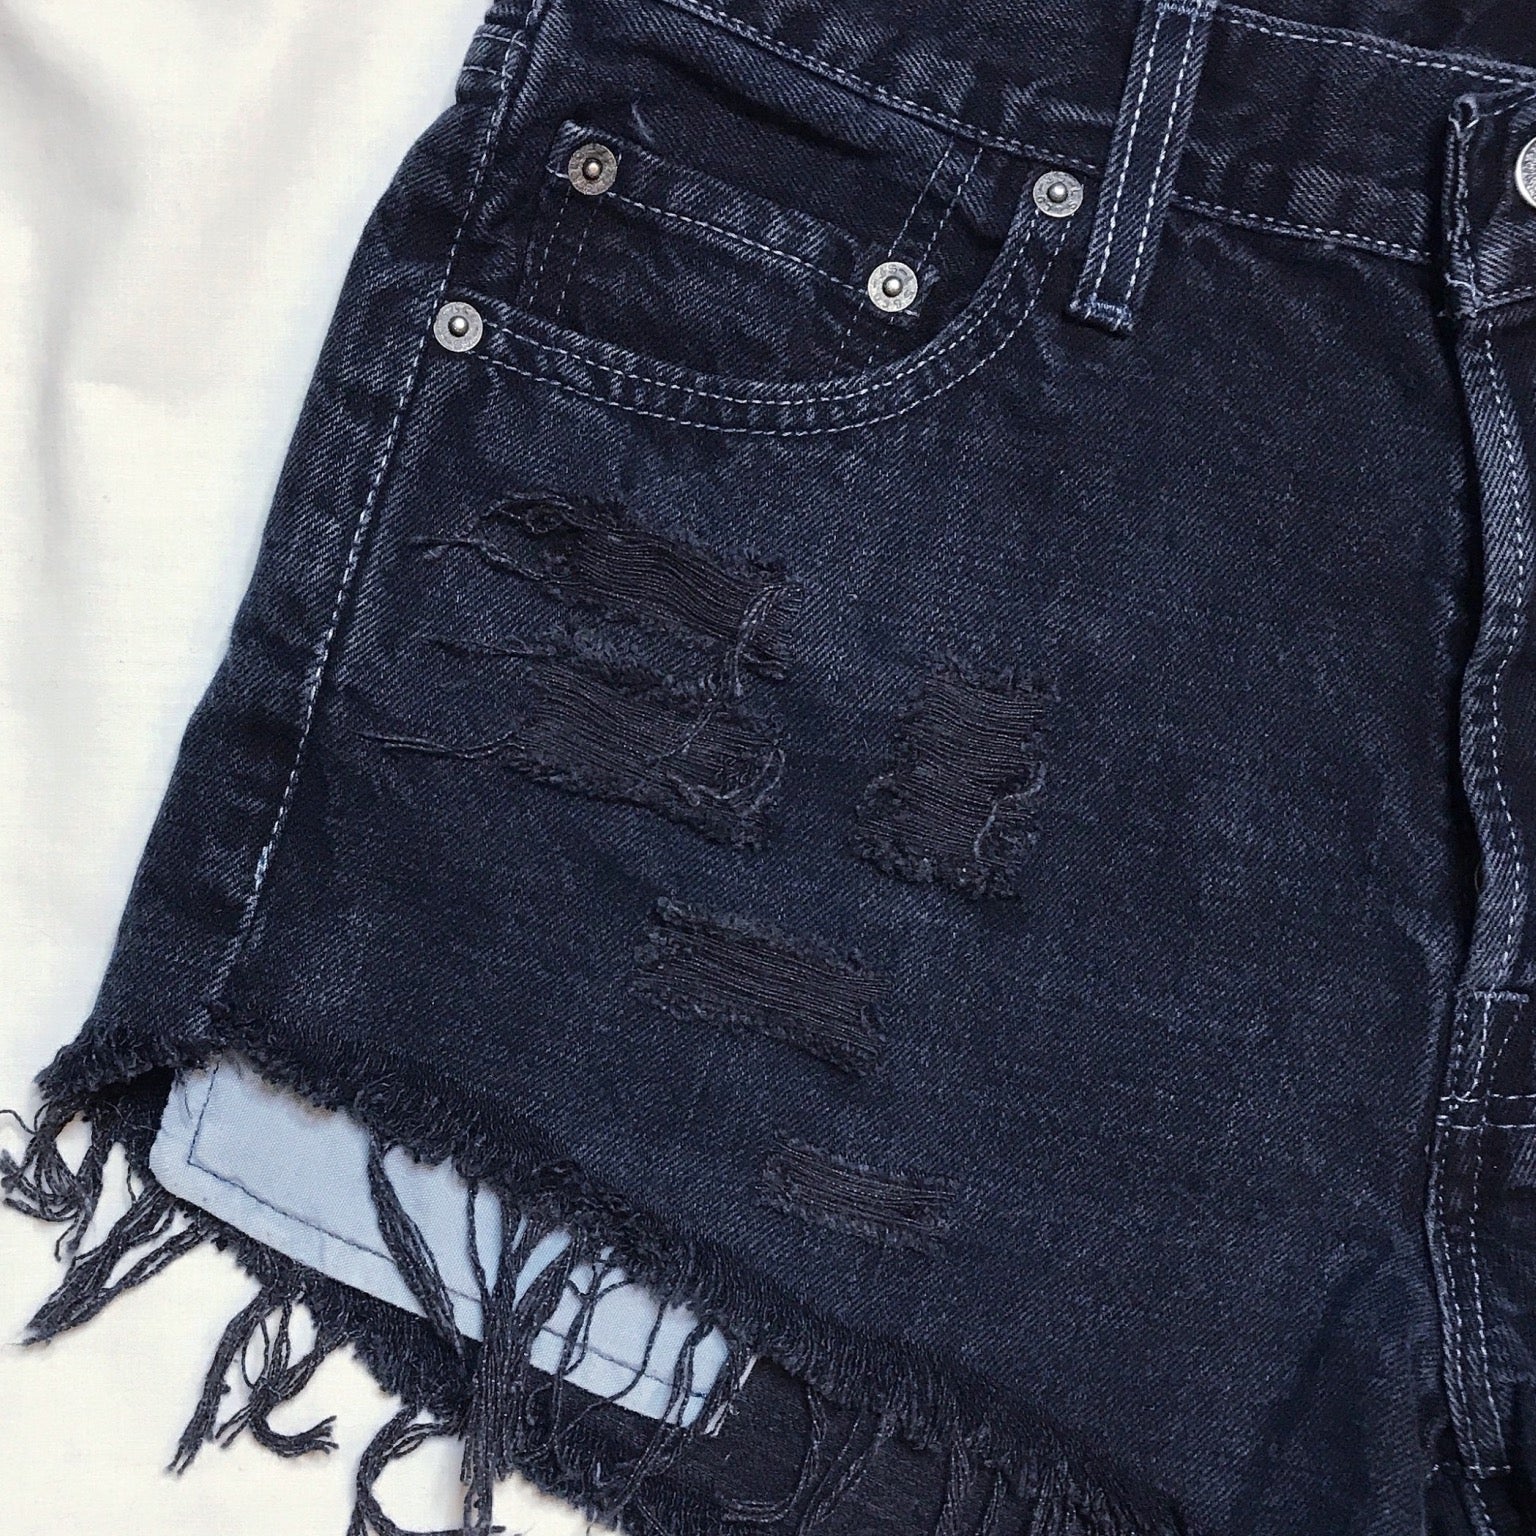 Vintage 501 Deep Navy Blue Distressed Cut Off High Waisted Levis